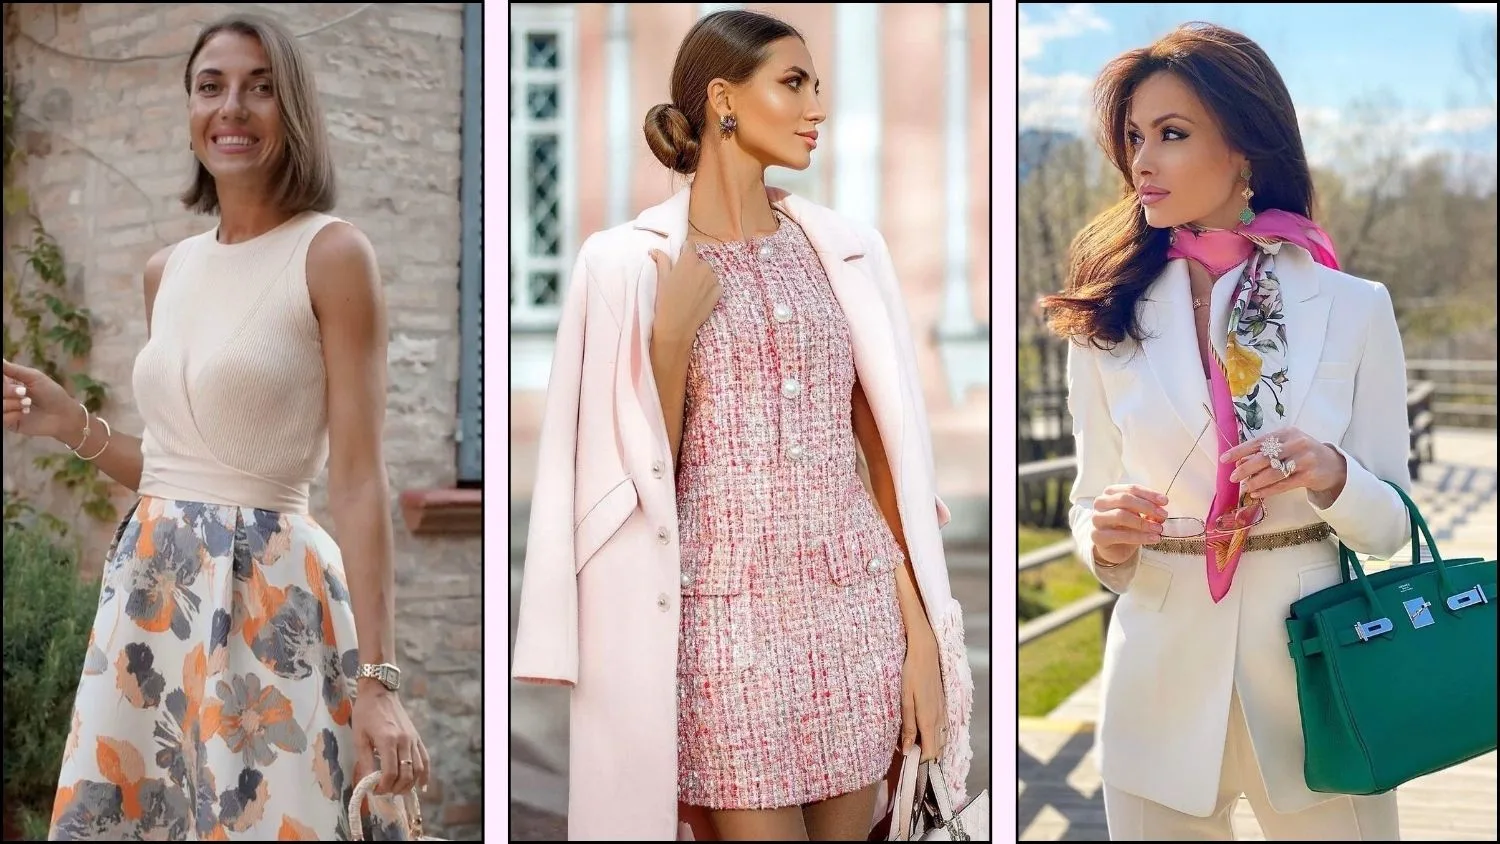 A collage of elegant spring outfit ideas